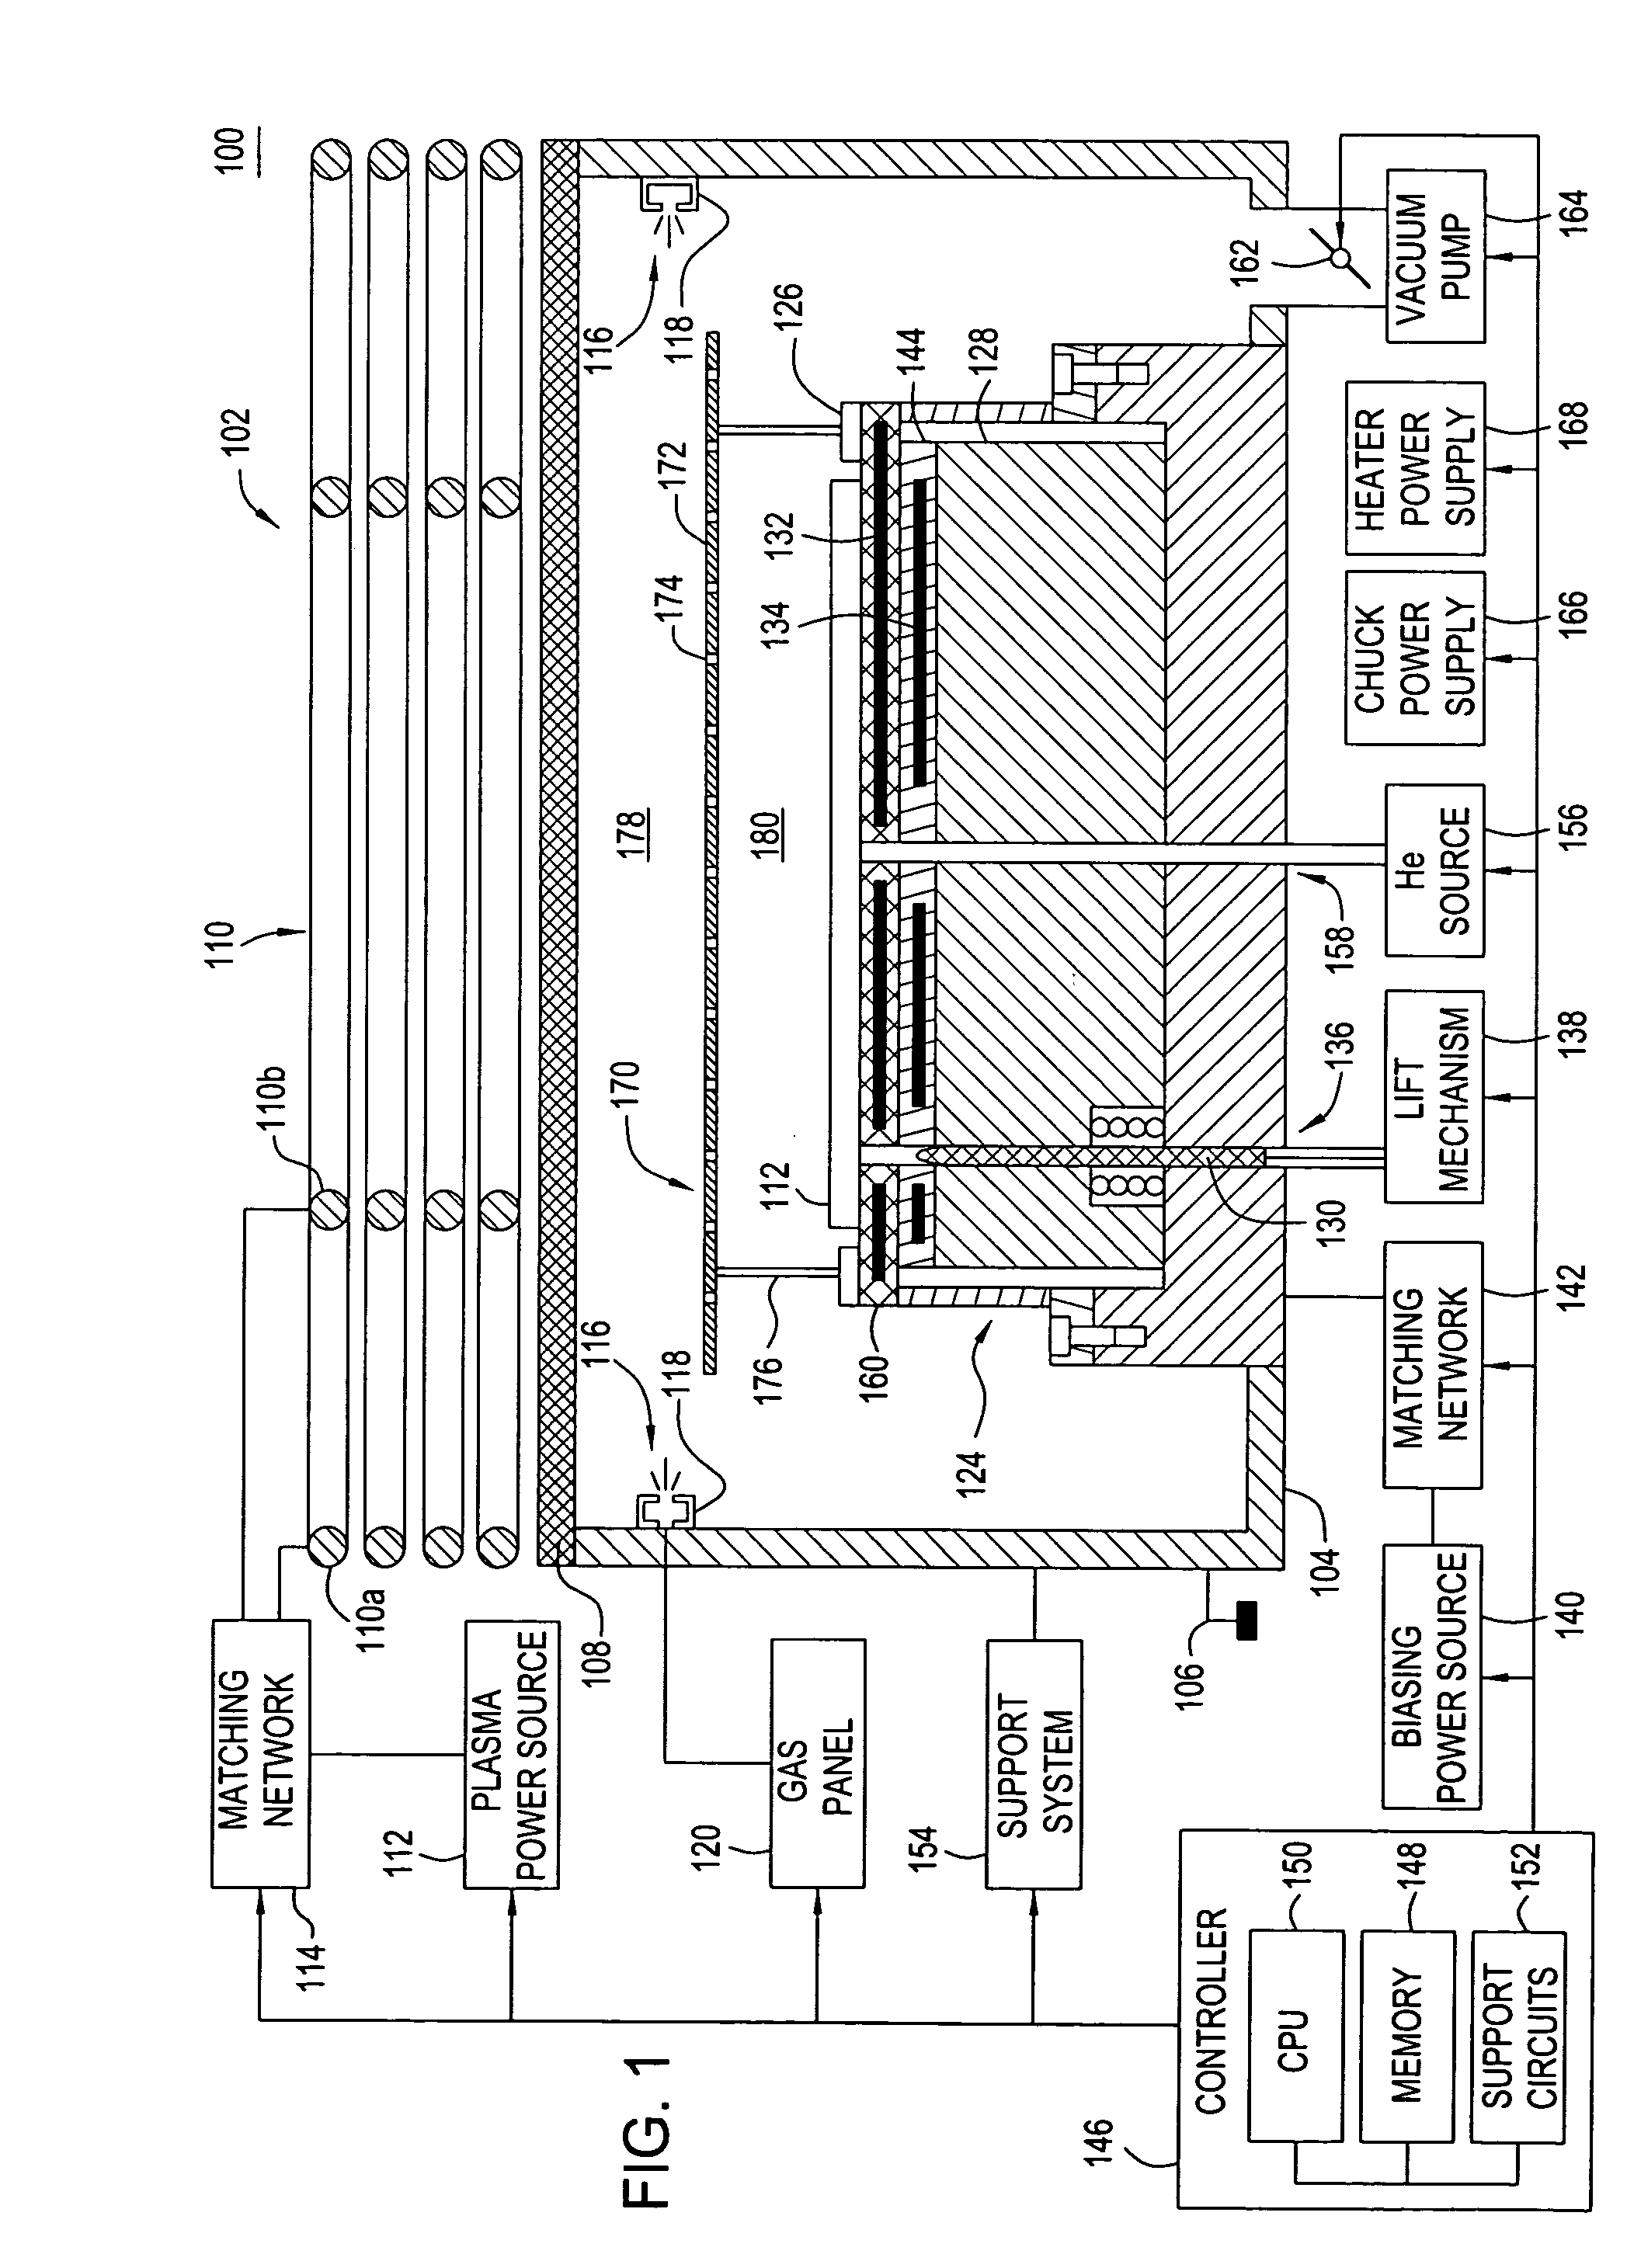 Method and apparatus for stable plasma processing